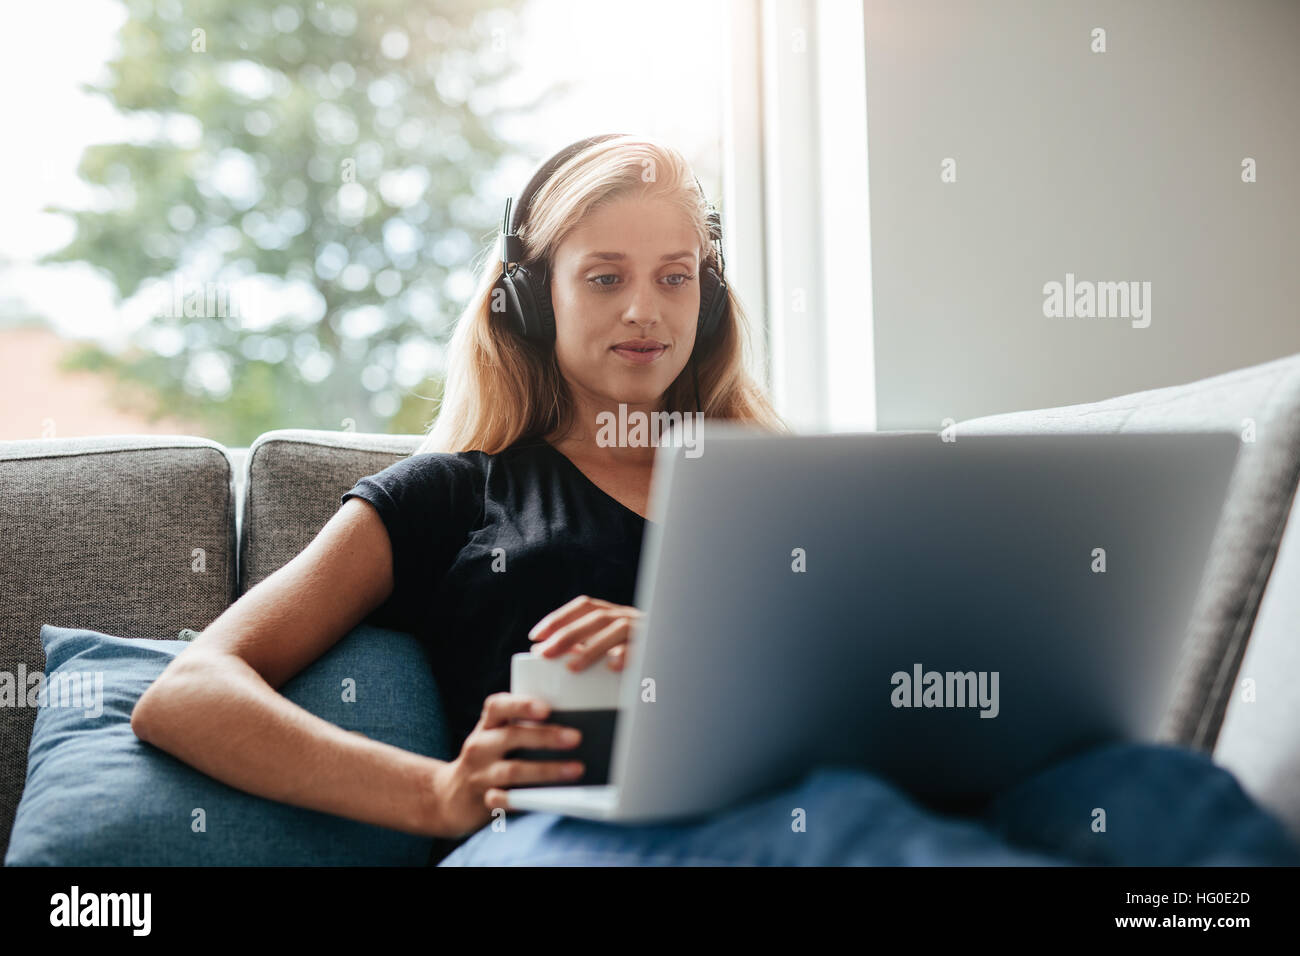 Young woman relaxing on sofa with laptop in living room. Female with headphones looking at laptop. Stock Photo